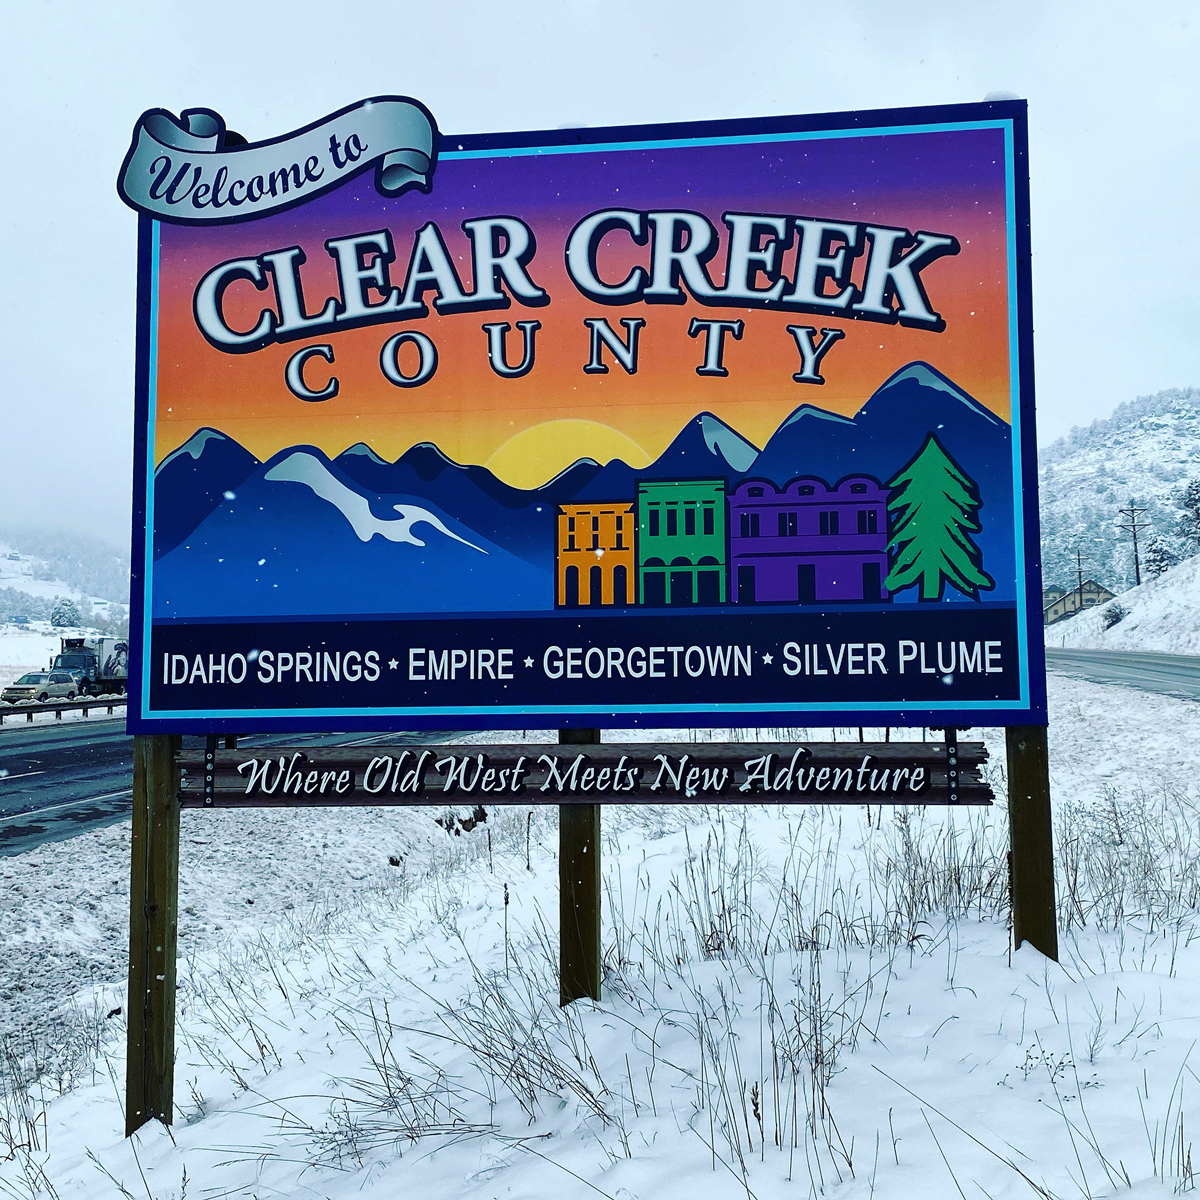 Welcome to Clear Creek County - Winter